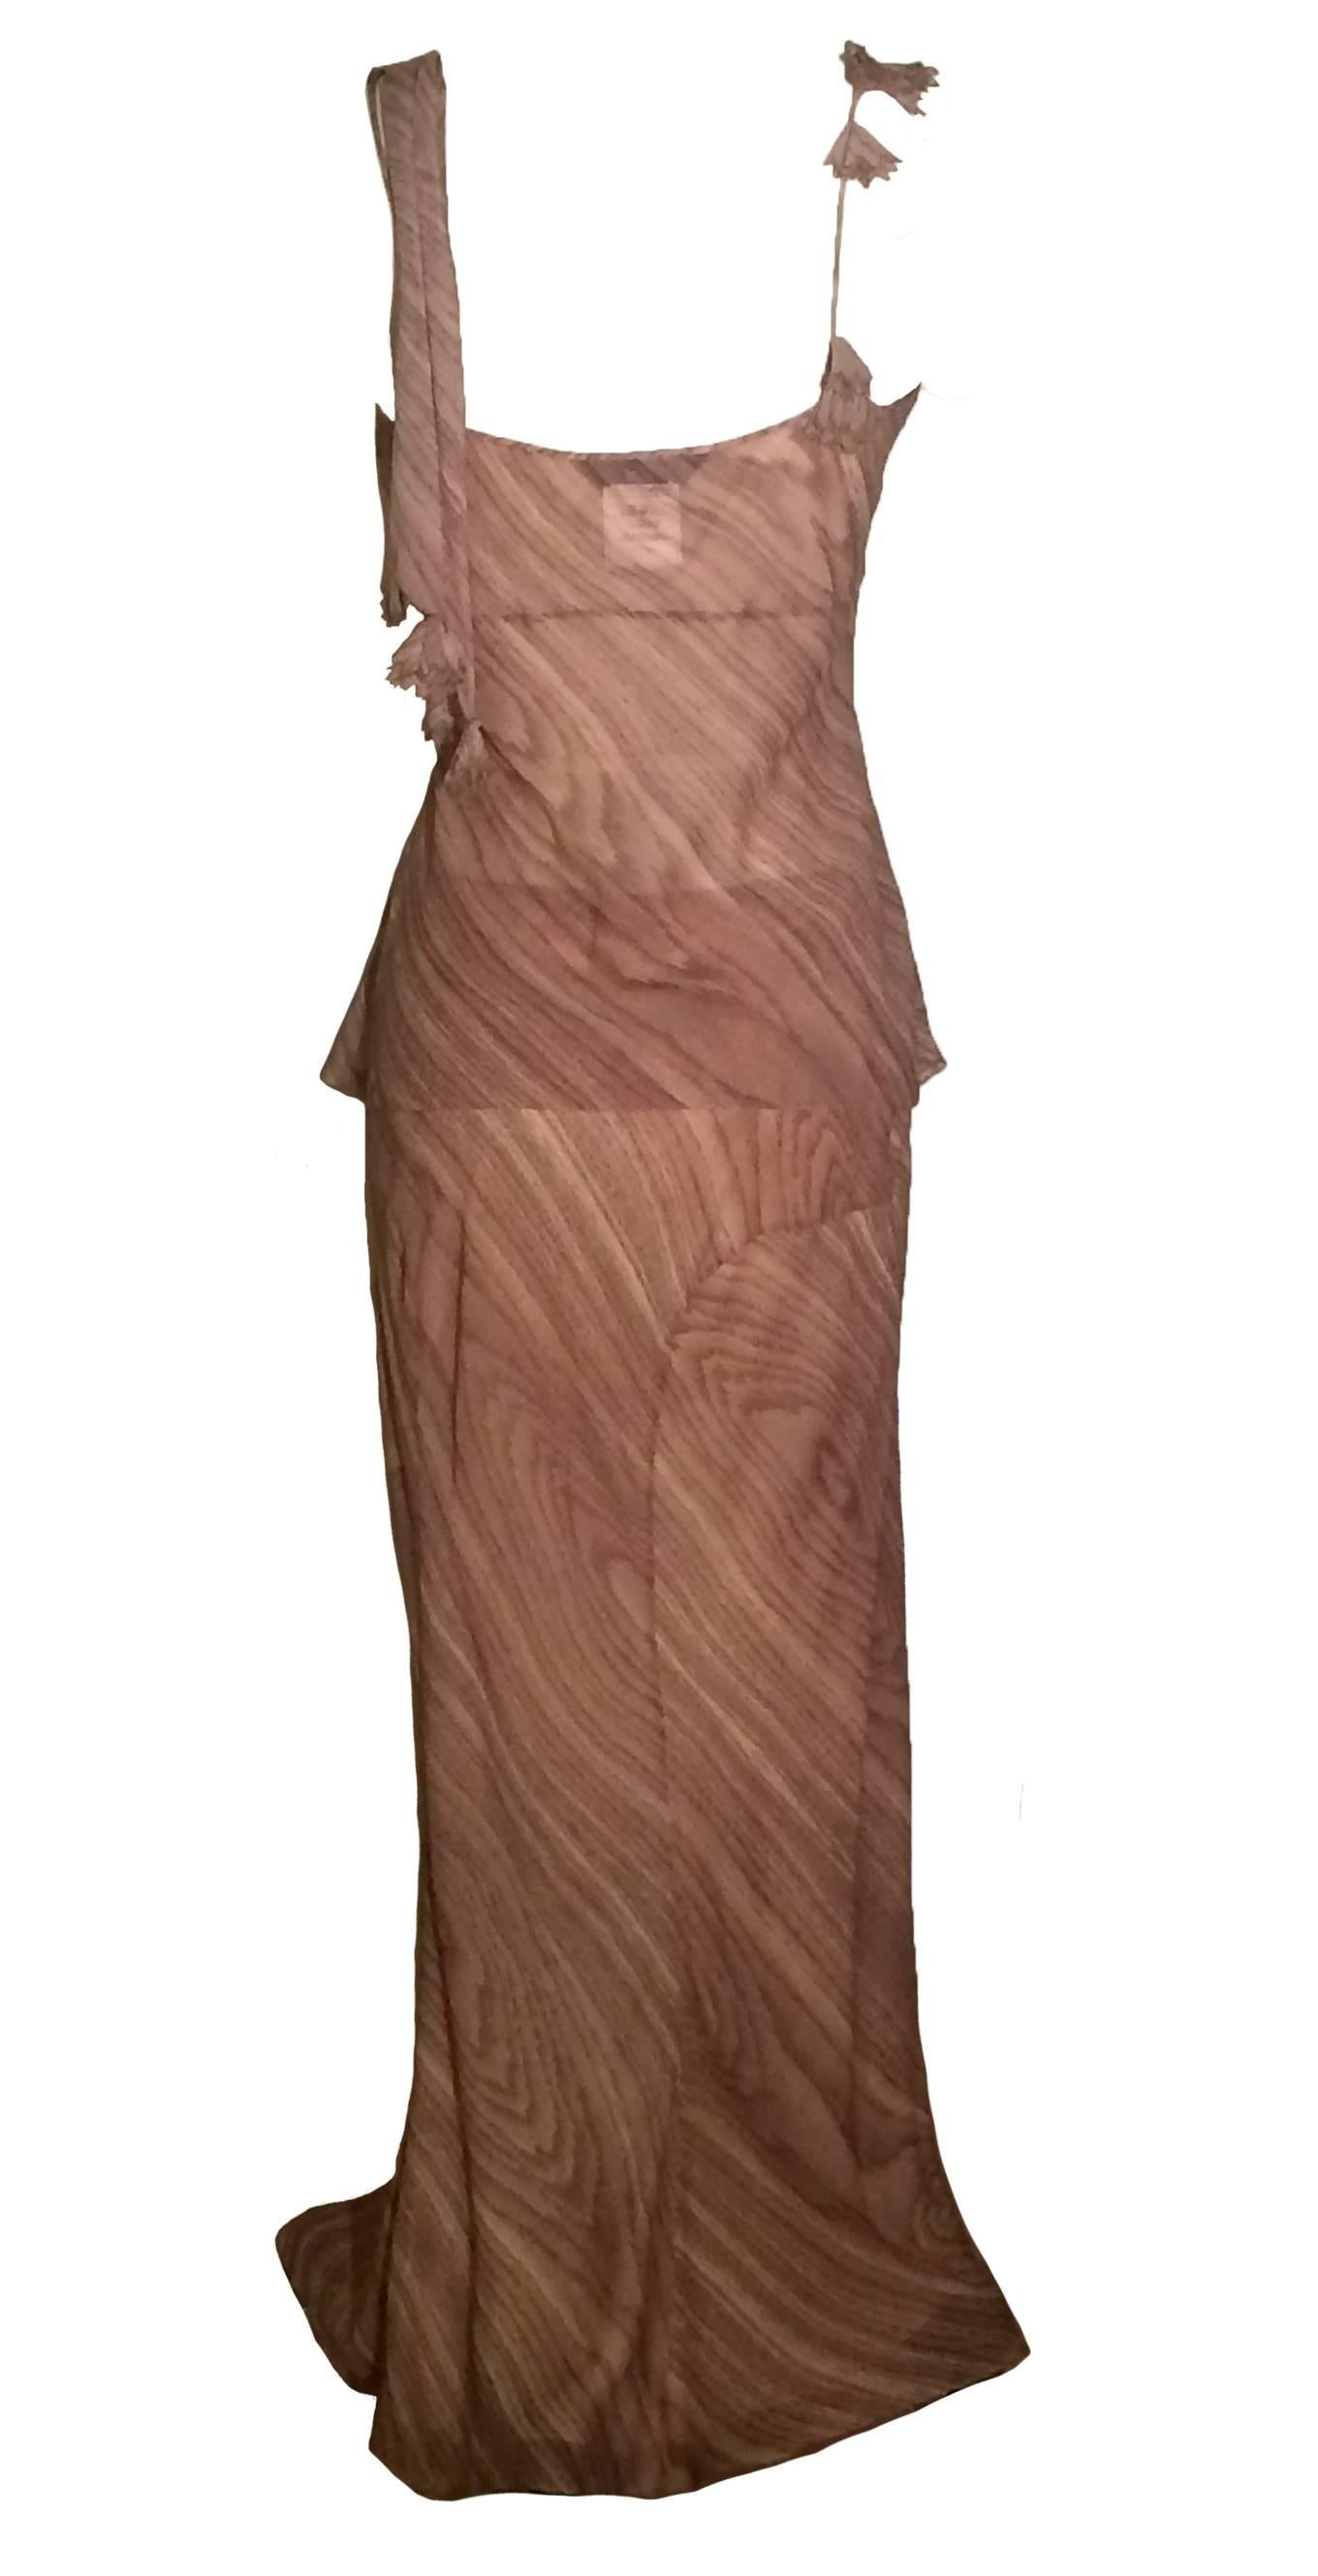 John Galliano Paris tan wood grain print maxi skirt and tank forming a gown like set. Fourteen small cloth covered buttons at side hip close skirt. 

100% silk.

Made in France. 

Top: US Size 8.
Bust 36